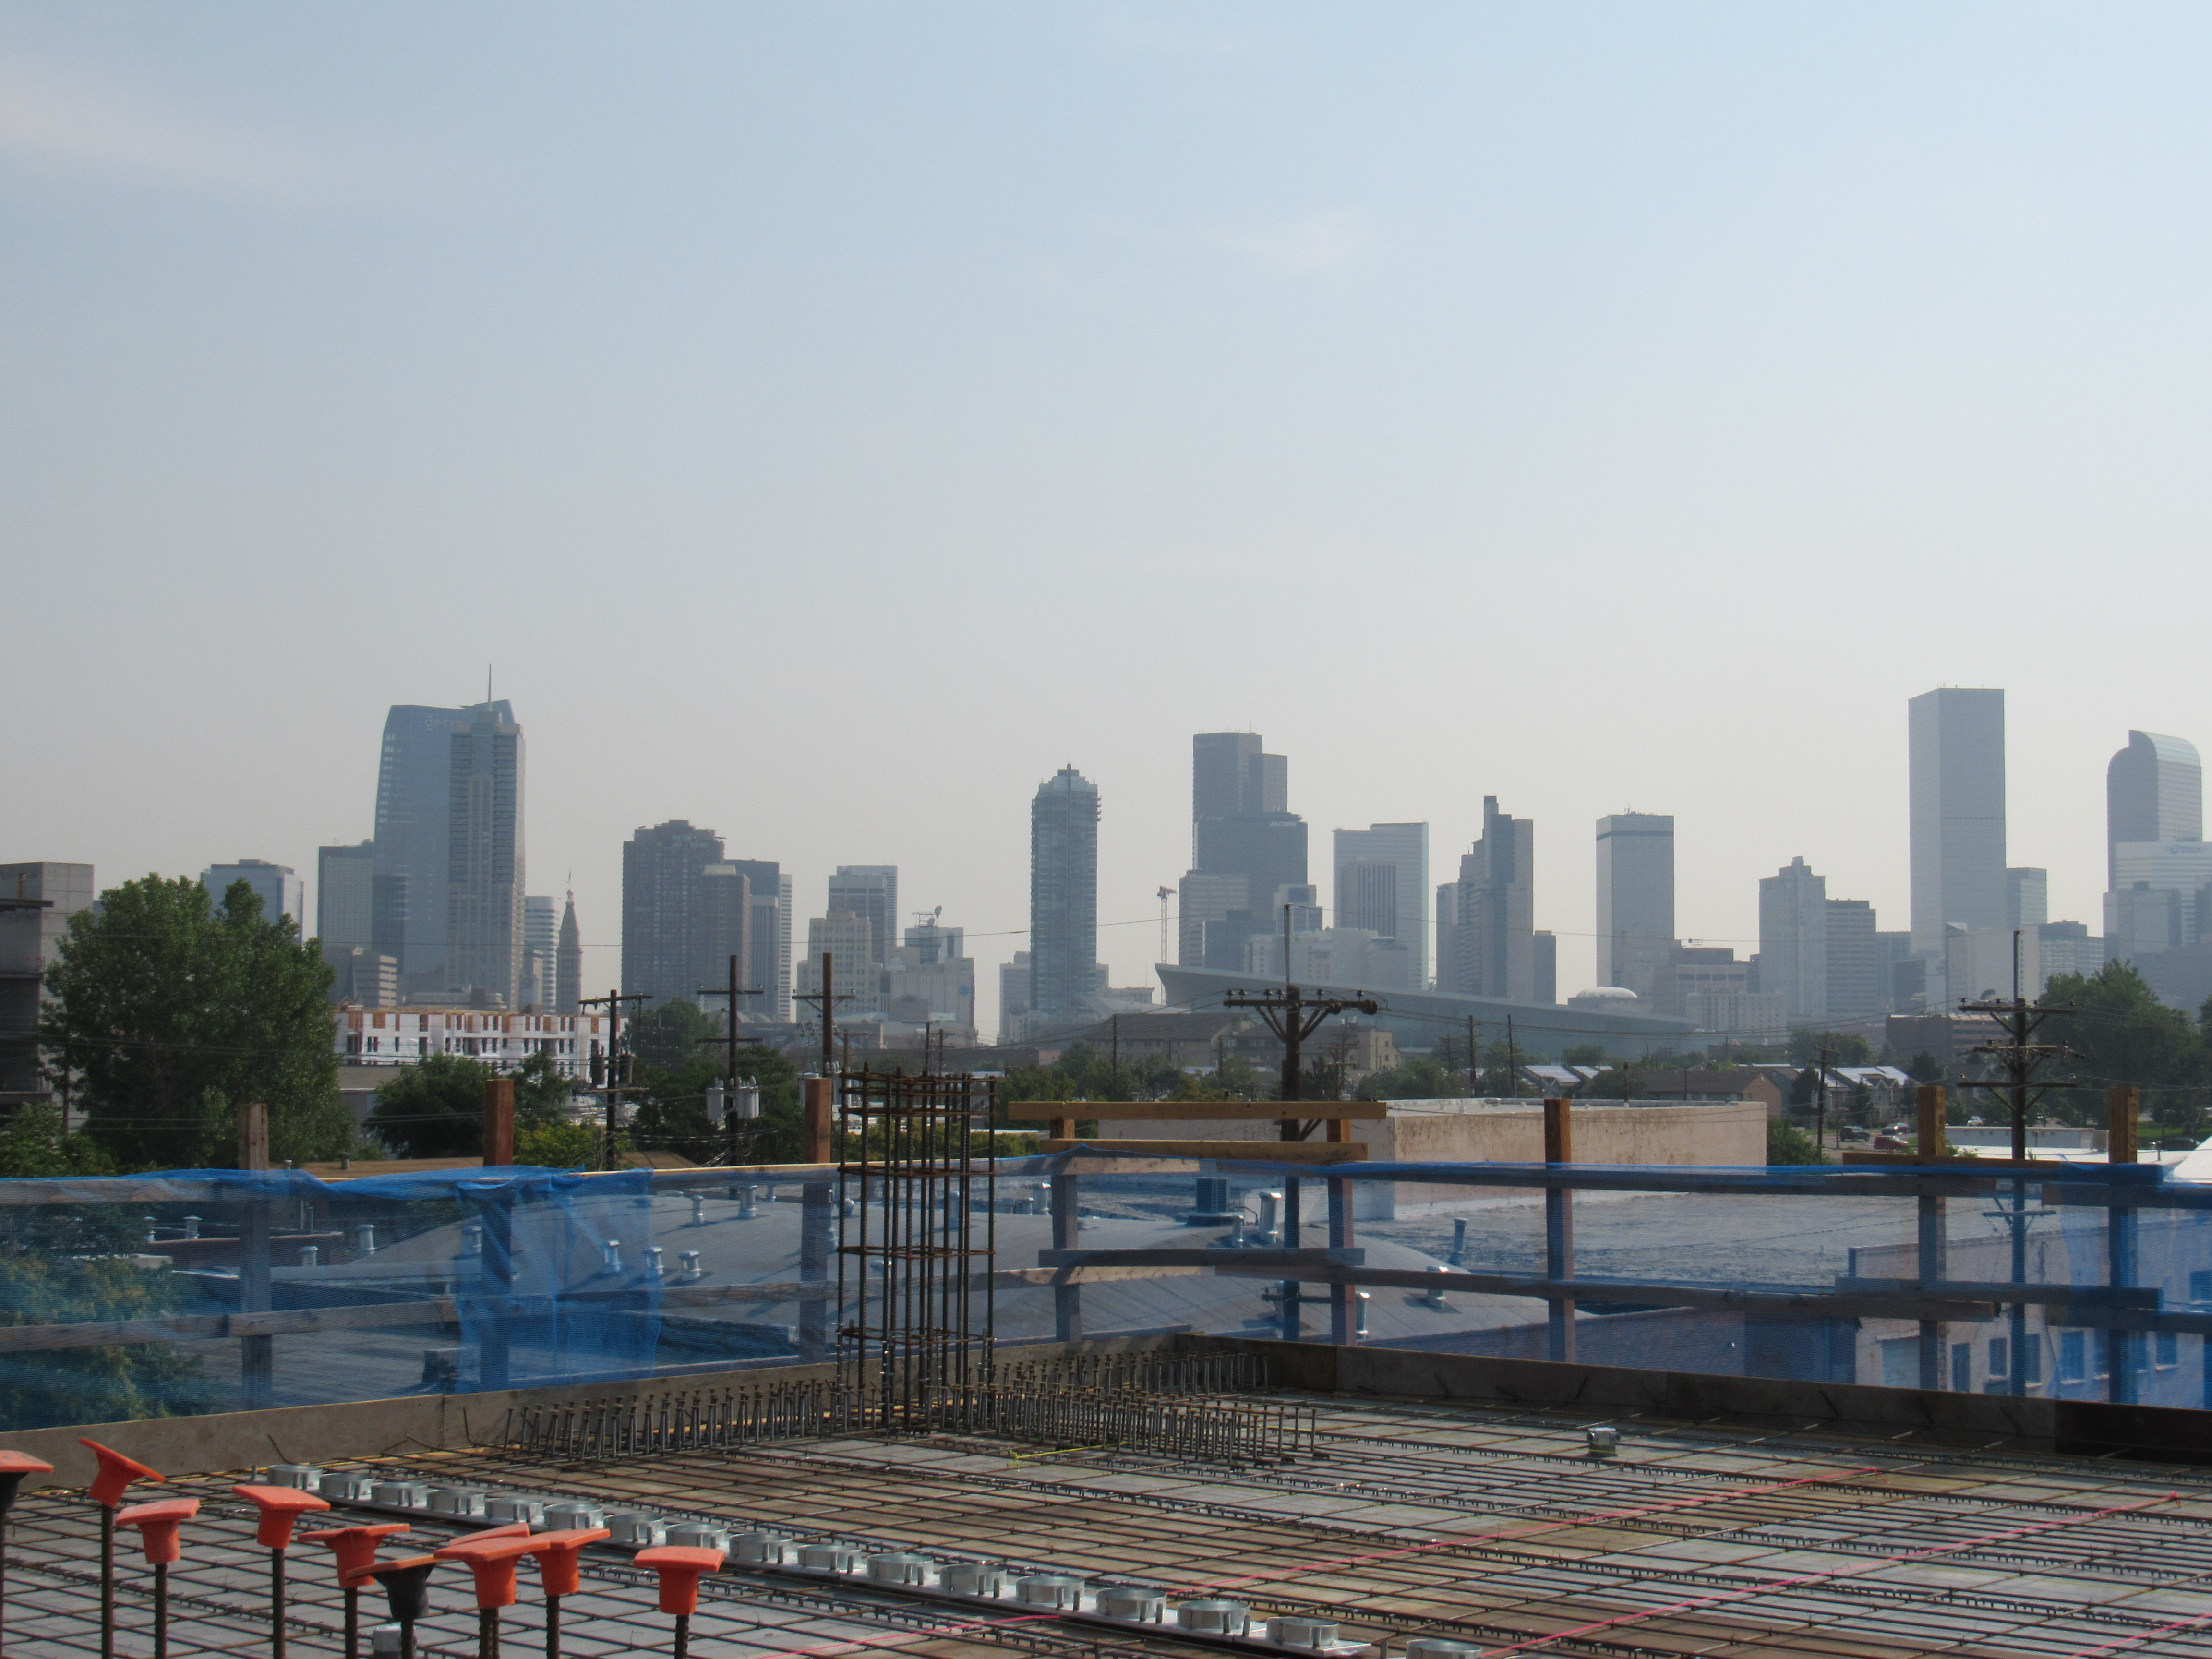 Foregrond shows the roof, under construction, with the downtown Denver skyline in the dstance under a hazy sky.